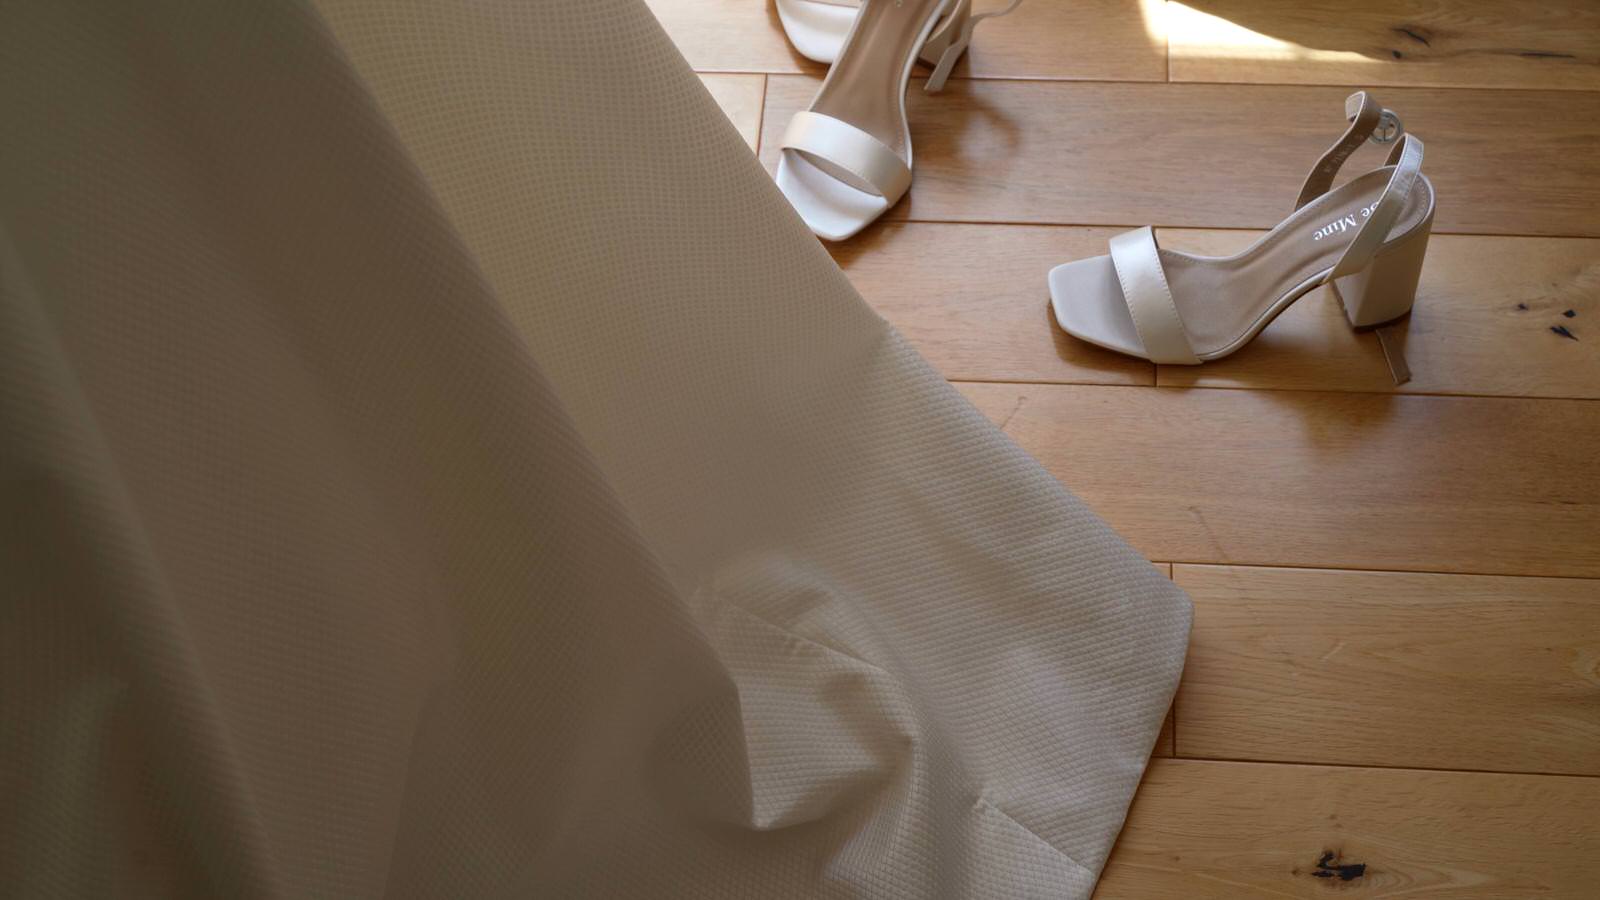 brides shoes on the floor as she gets dressed